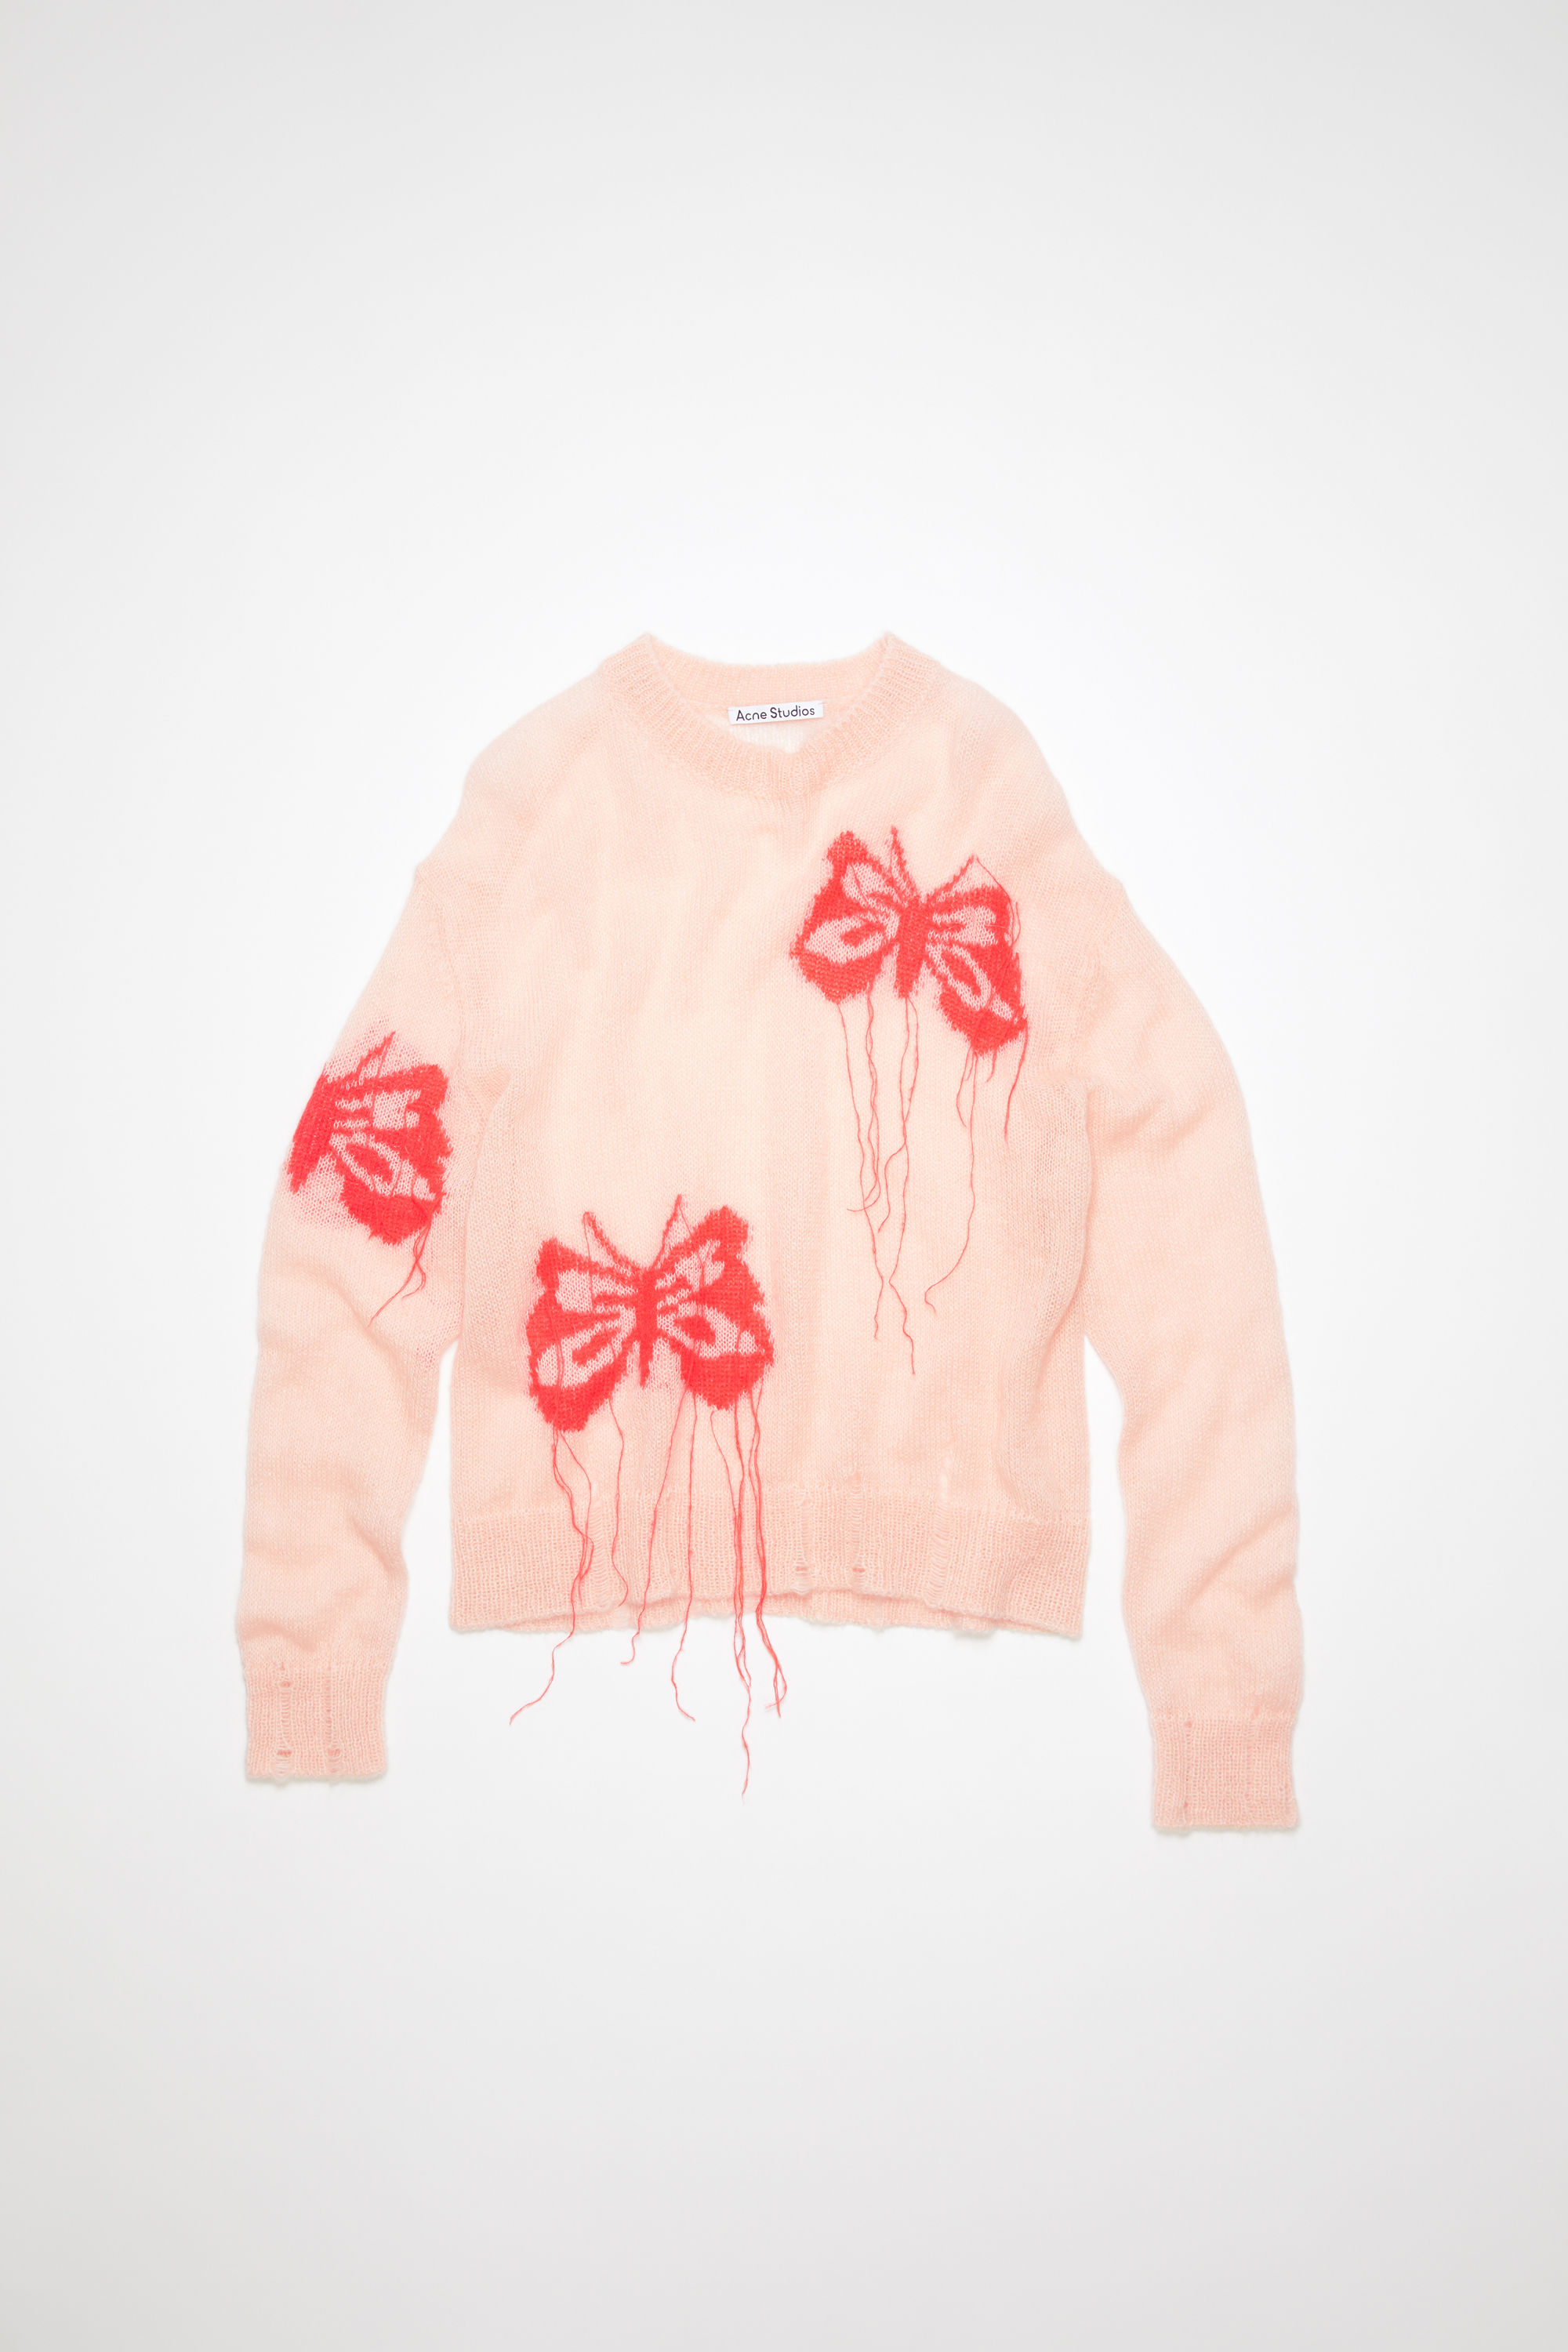 ACNE STUDIOS ACNE STUDIOS FN-WN-KNIT000624 PALE PINK/RED BUTTERFLY KNIT JUMPER